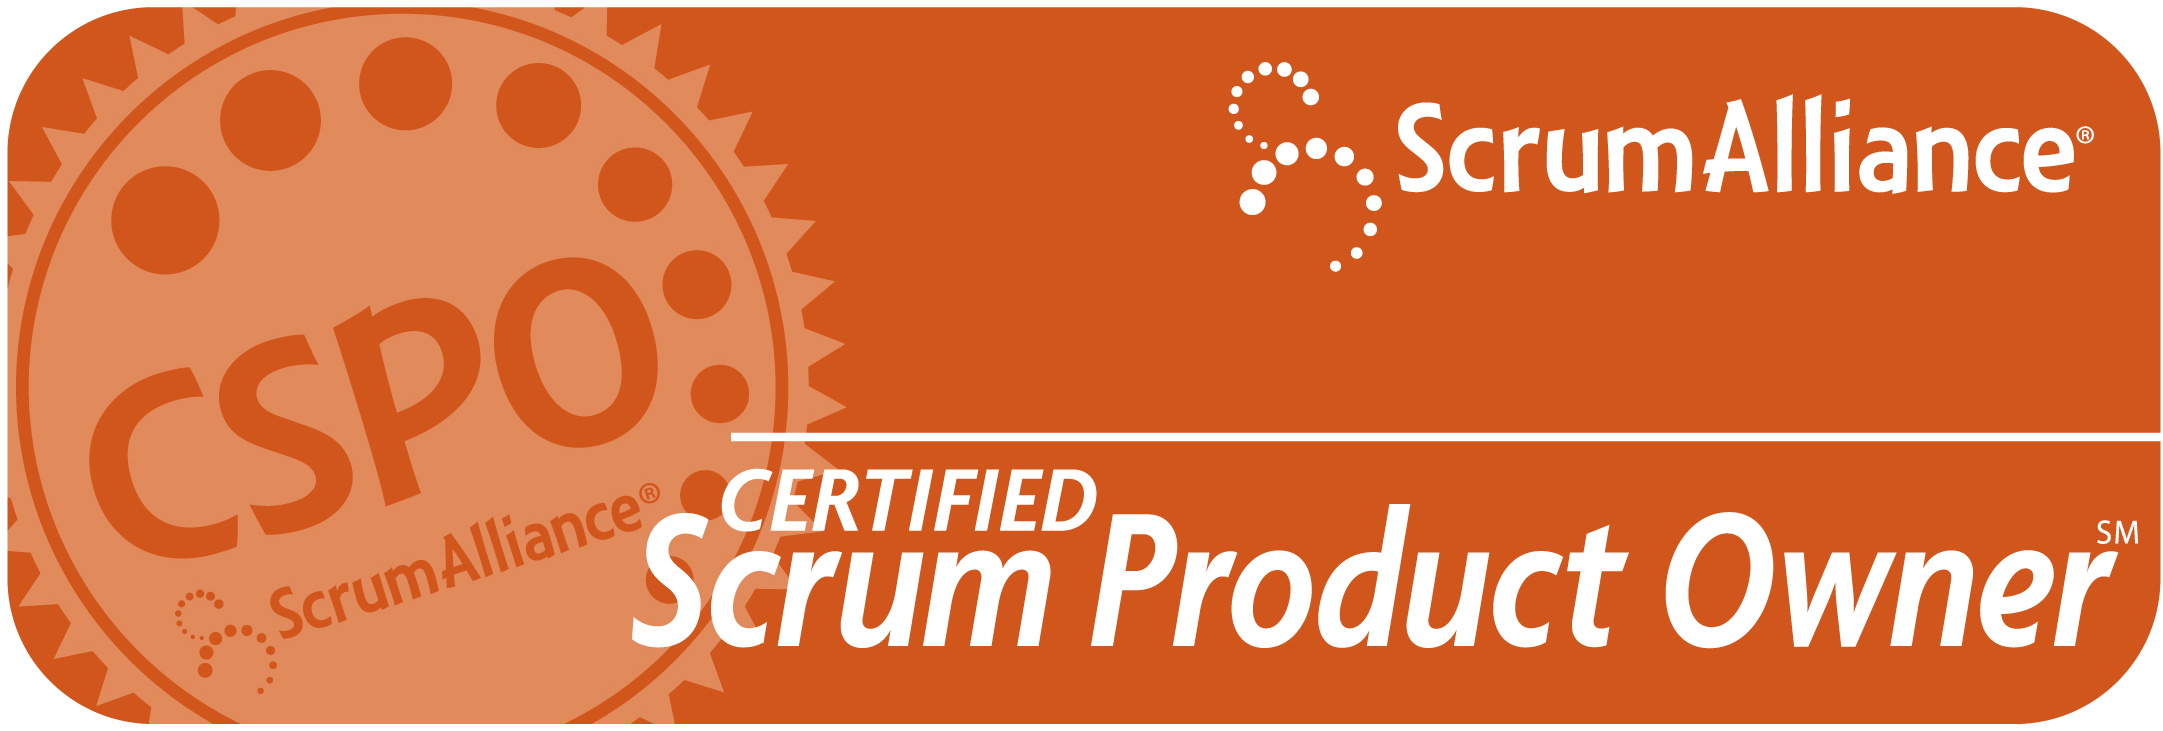 procognita-certified-scrum-product-owner-listopad-2018